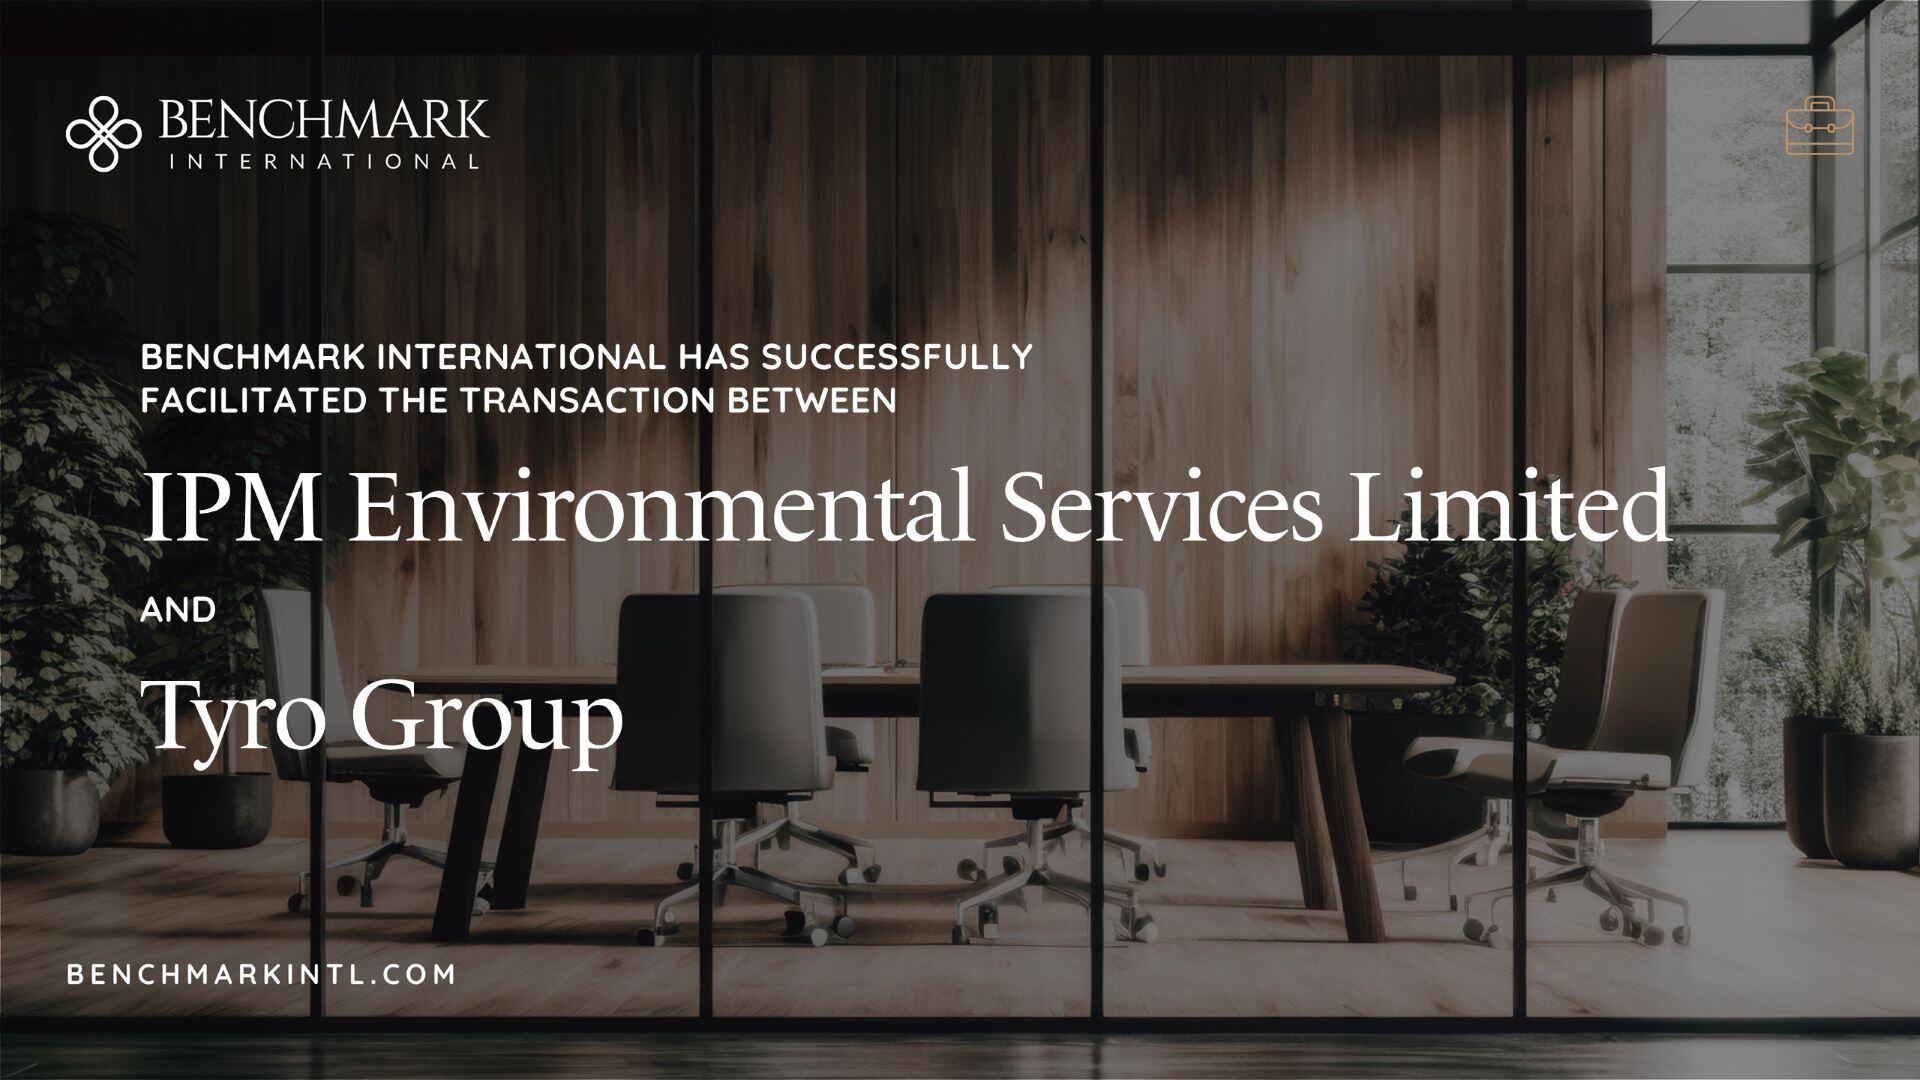 Benchmark International Successfully Facilitated the Transaction Between IPM Environmental Services Limited and Tyro Group